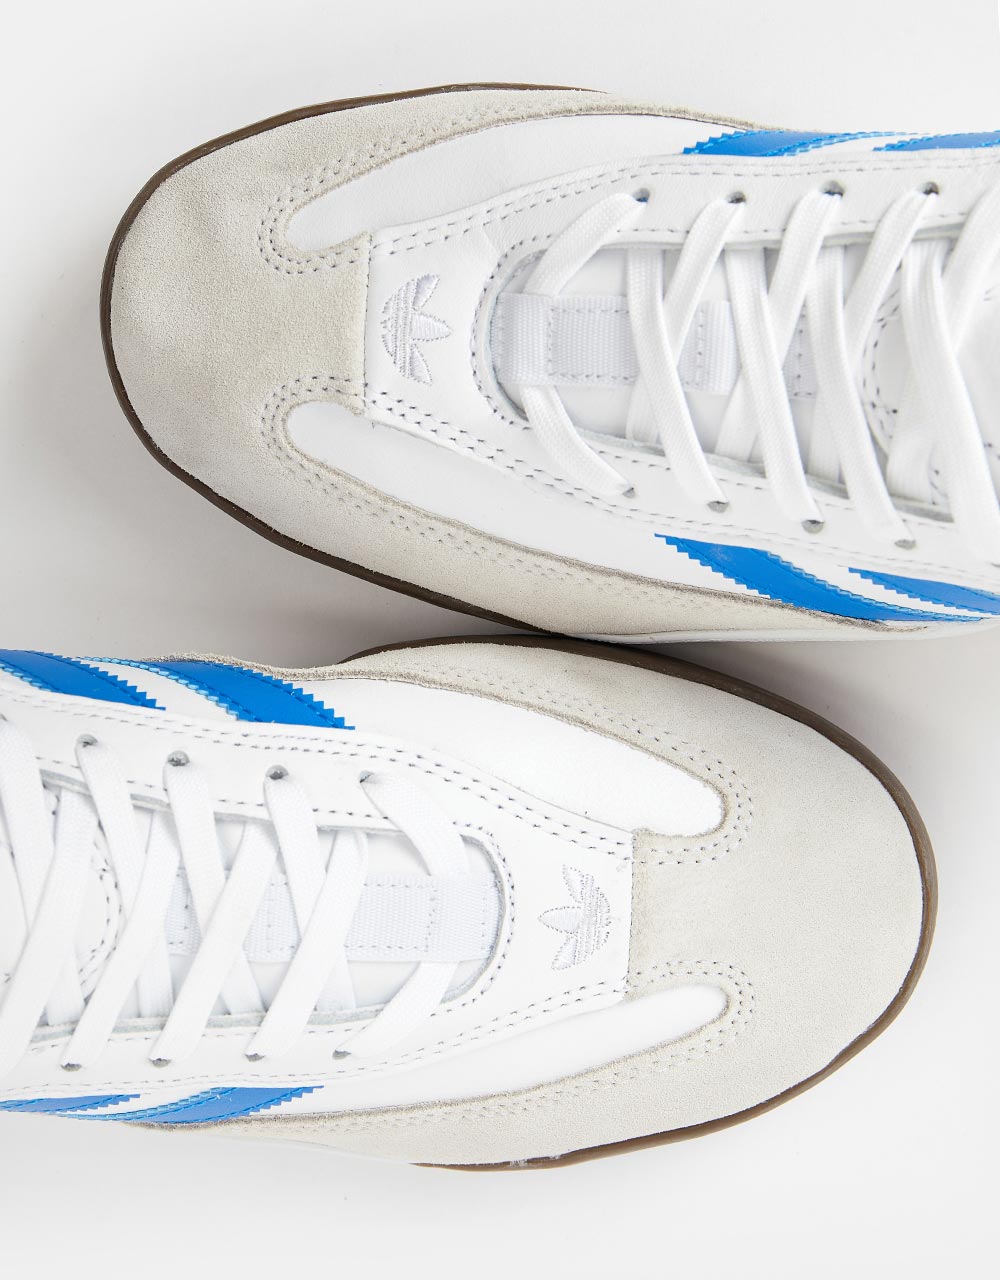 adidas Copa Nationale Skate Shoes - White/Bluebird/Scarlet